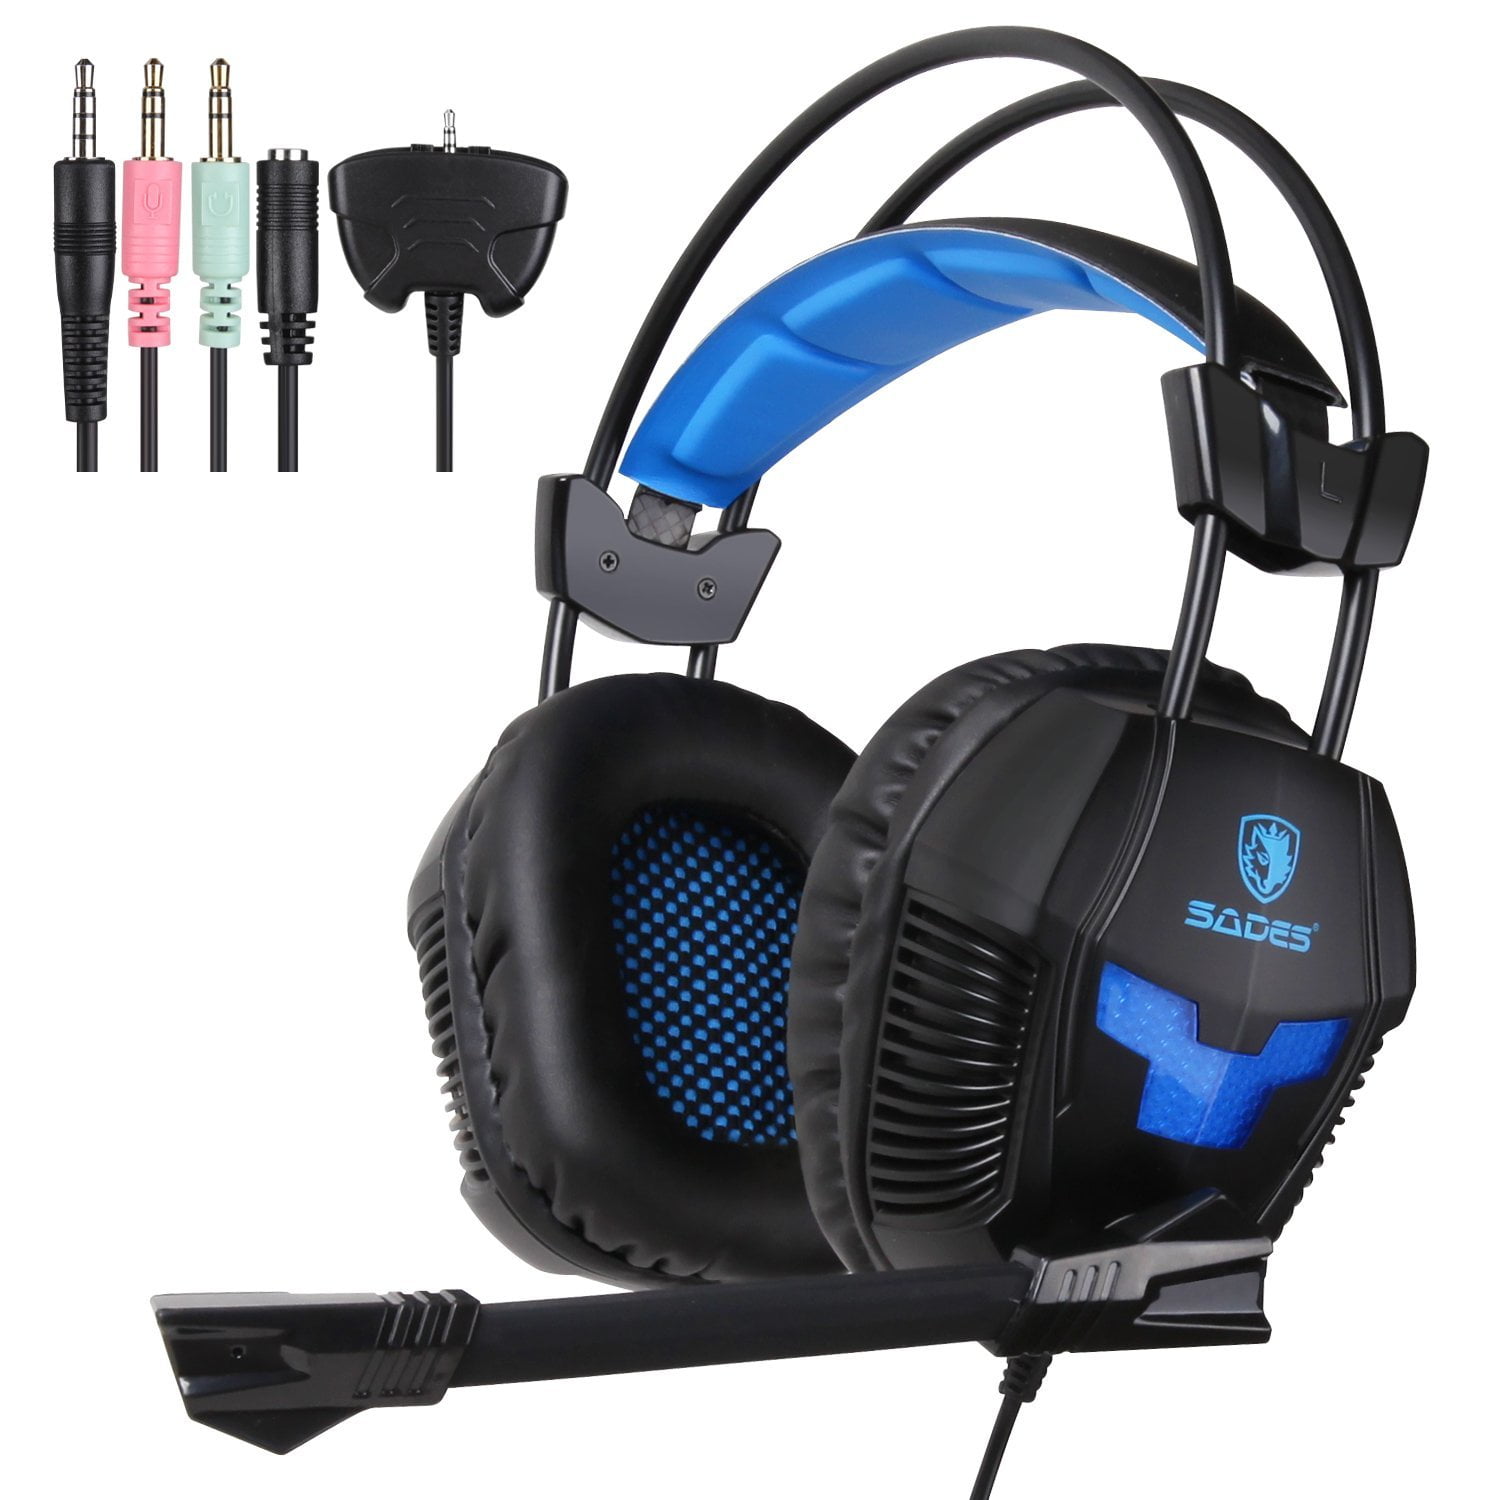 Sades Sa 921 Professional Wired Pc Gaming Headset Over Ear Headphones With Microphone For Pc Laptop Ps4 Xbox Cellphone Walmart Com Walmart Com